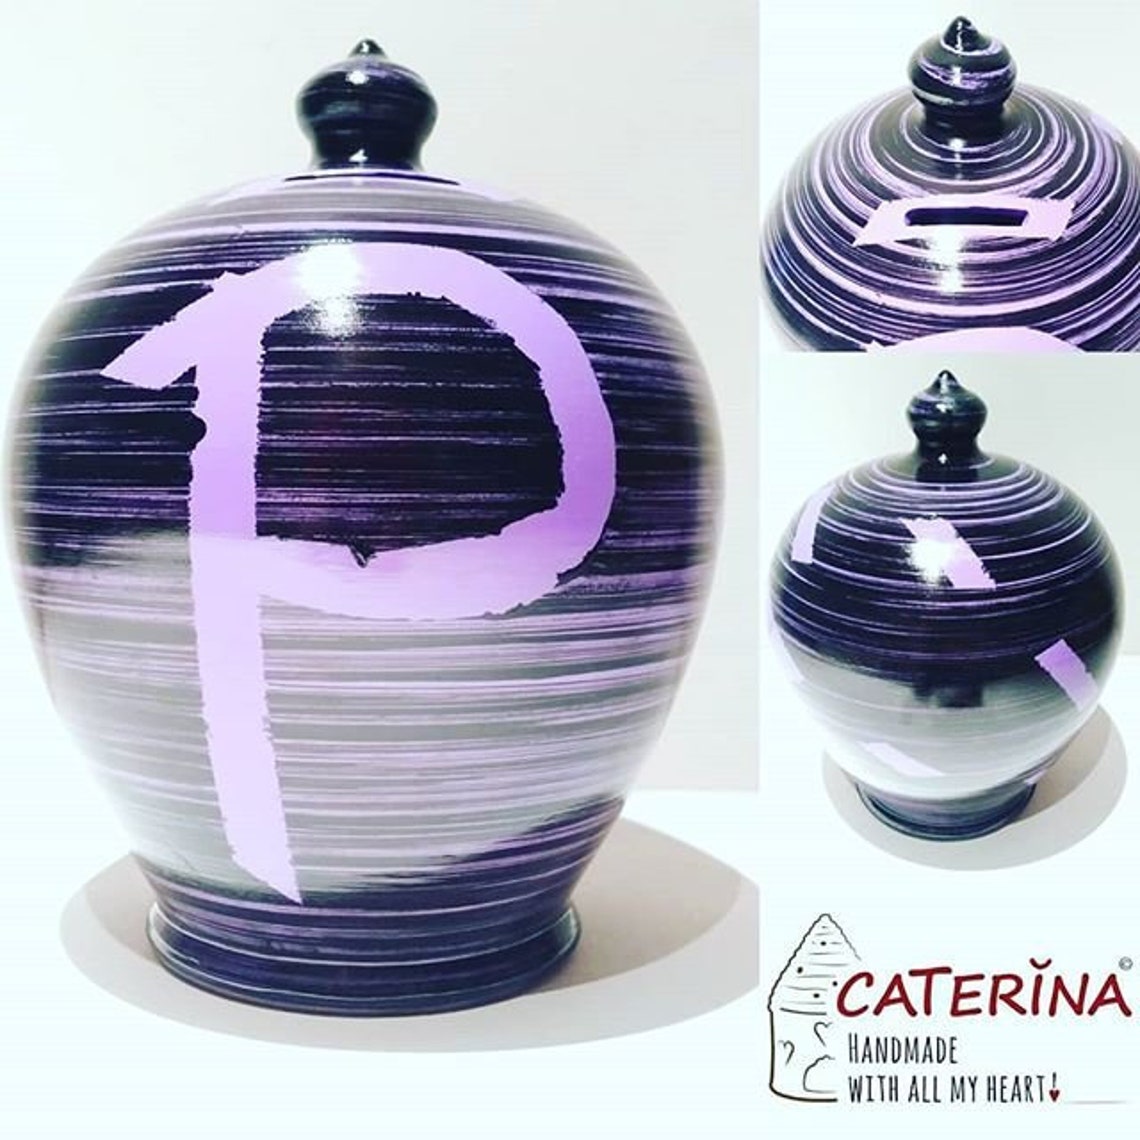 Looking for a personalized coin bank for that special someone? We welcome custom orders! We will hand draw your initials and/or hand paint your piggy bank with colors of your choice. A great gift idea for both women and men!  💰 Size: 30 cm = 11,811 Inches. Circumference: 72 cm = 28,3 inches.  Colors: Brilliant Purple and Black, as in picture.  With hole and stopper plug, or without hole.